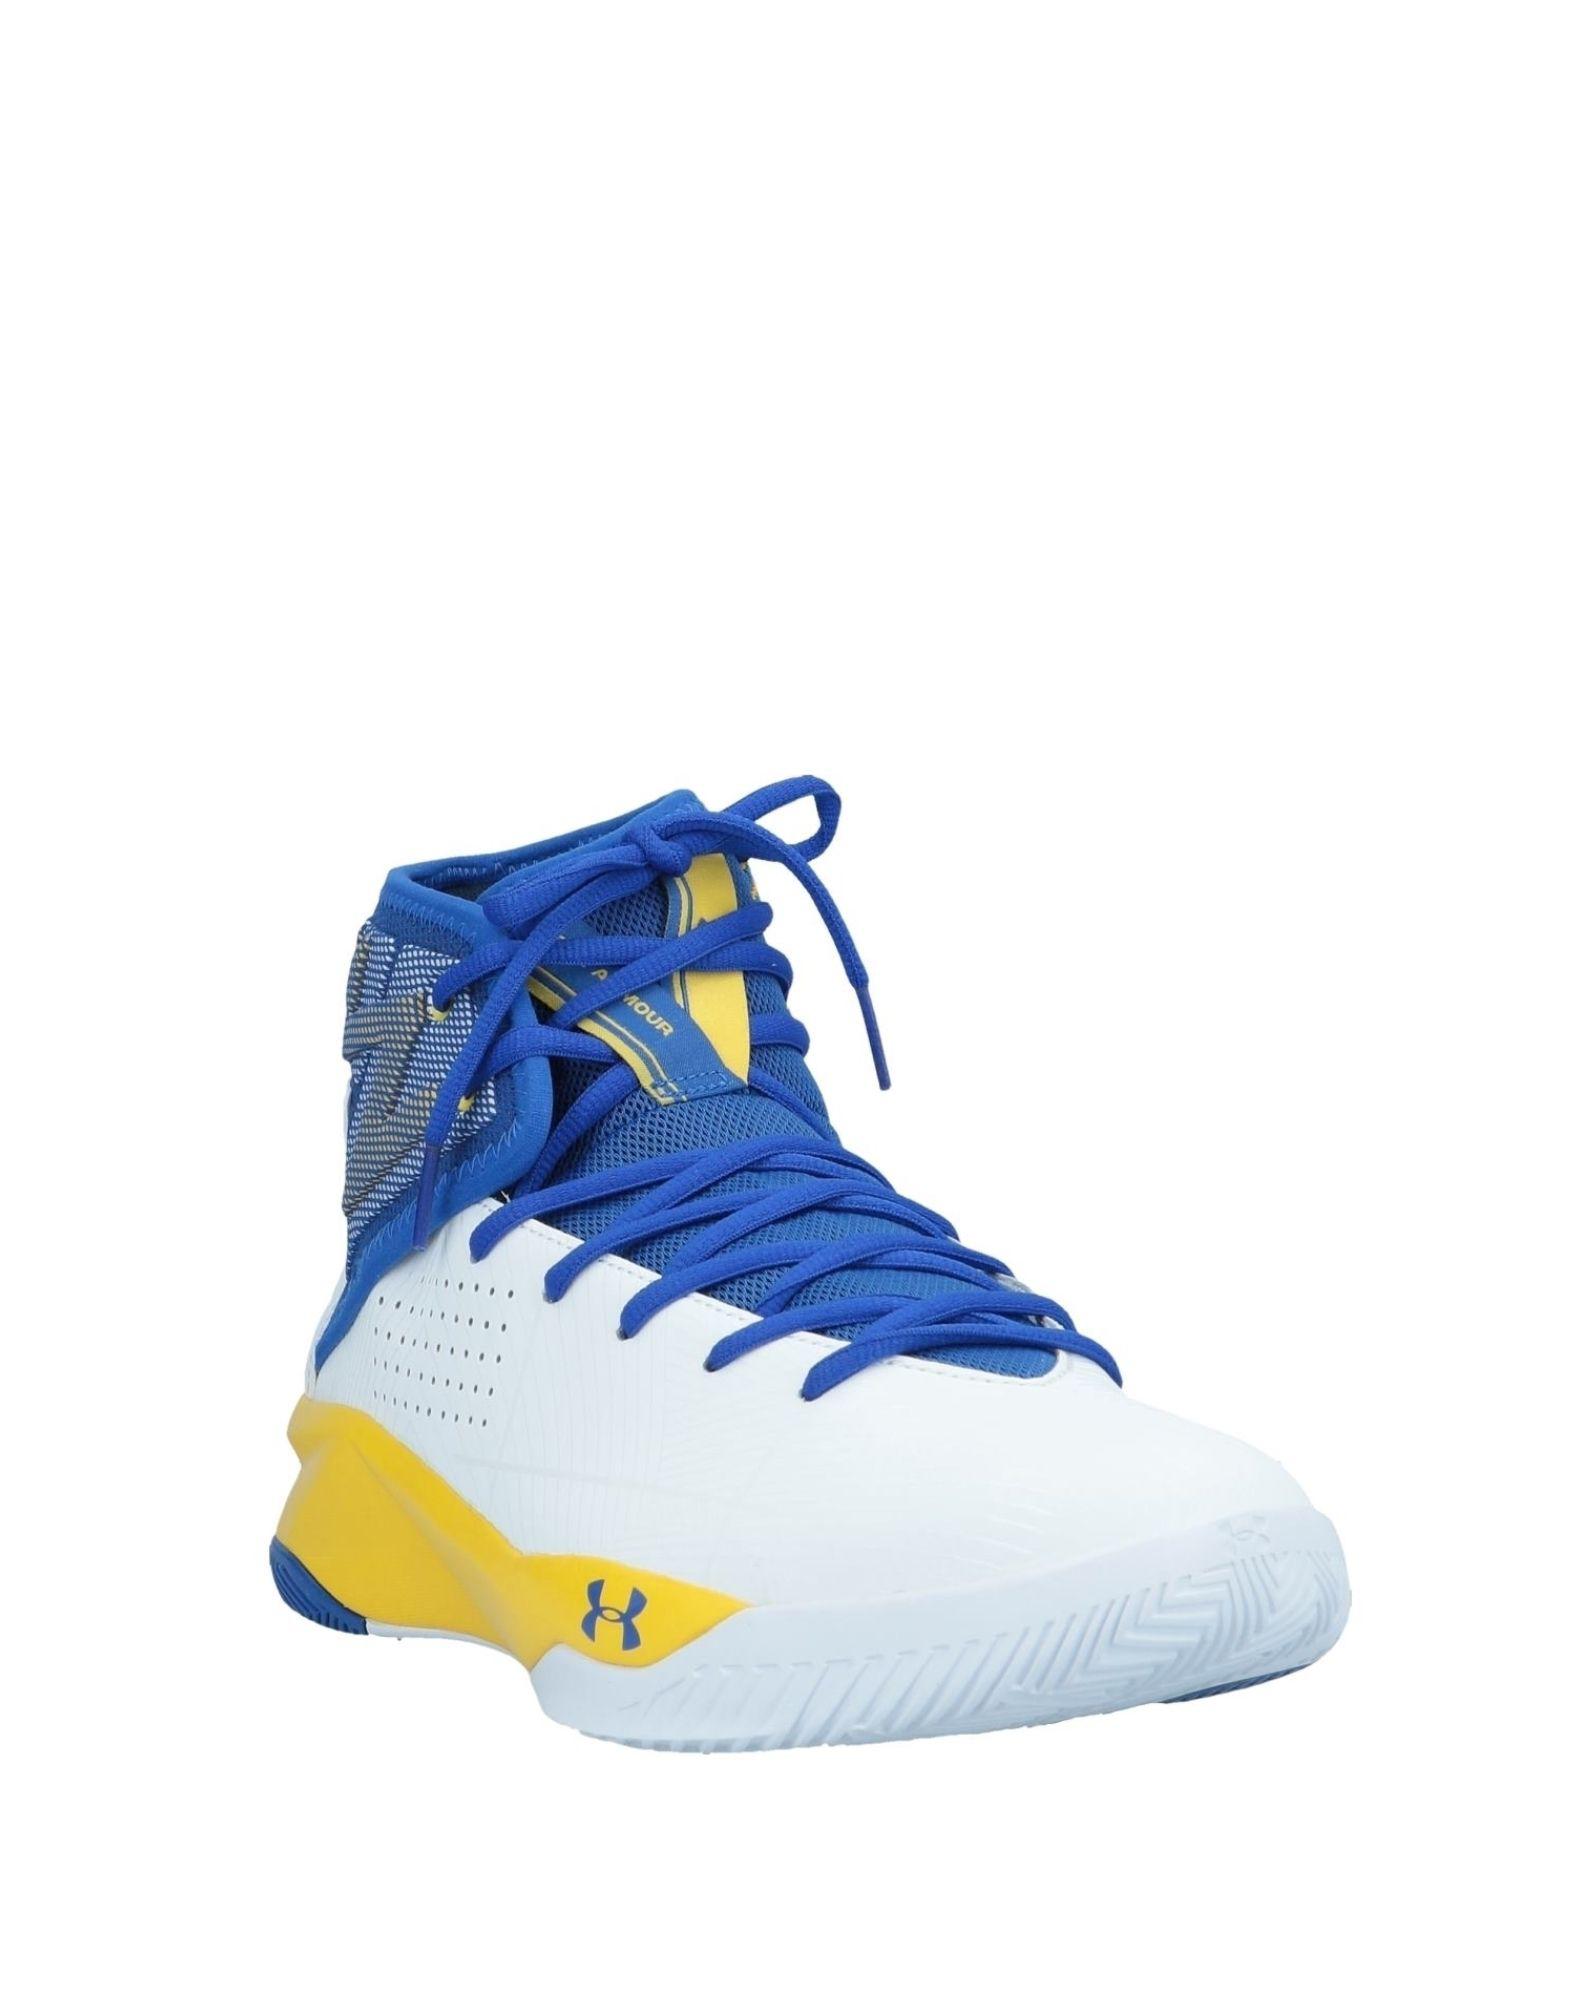 Under Armour High-tops & Sneakers in White for Men - Lyst